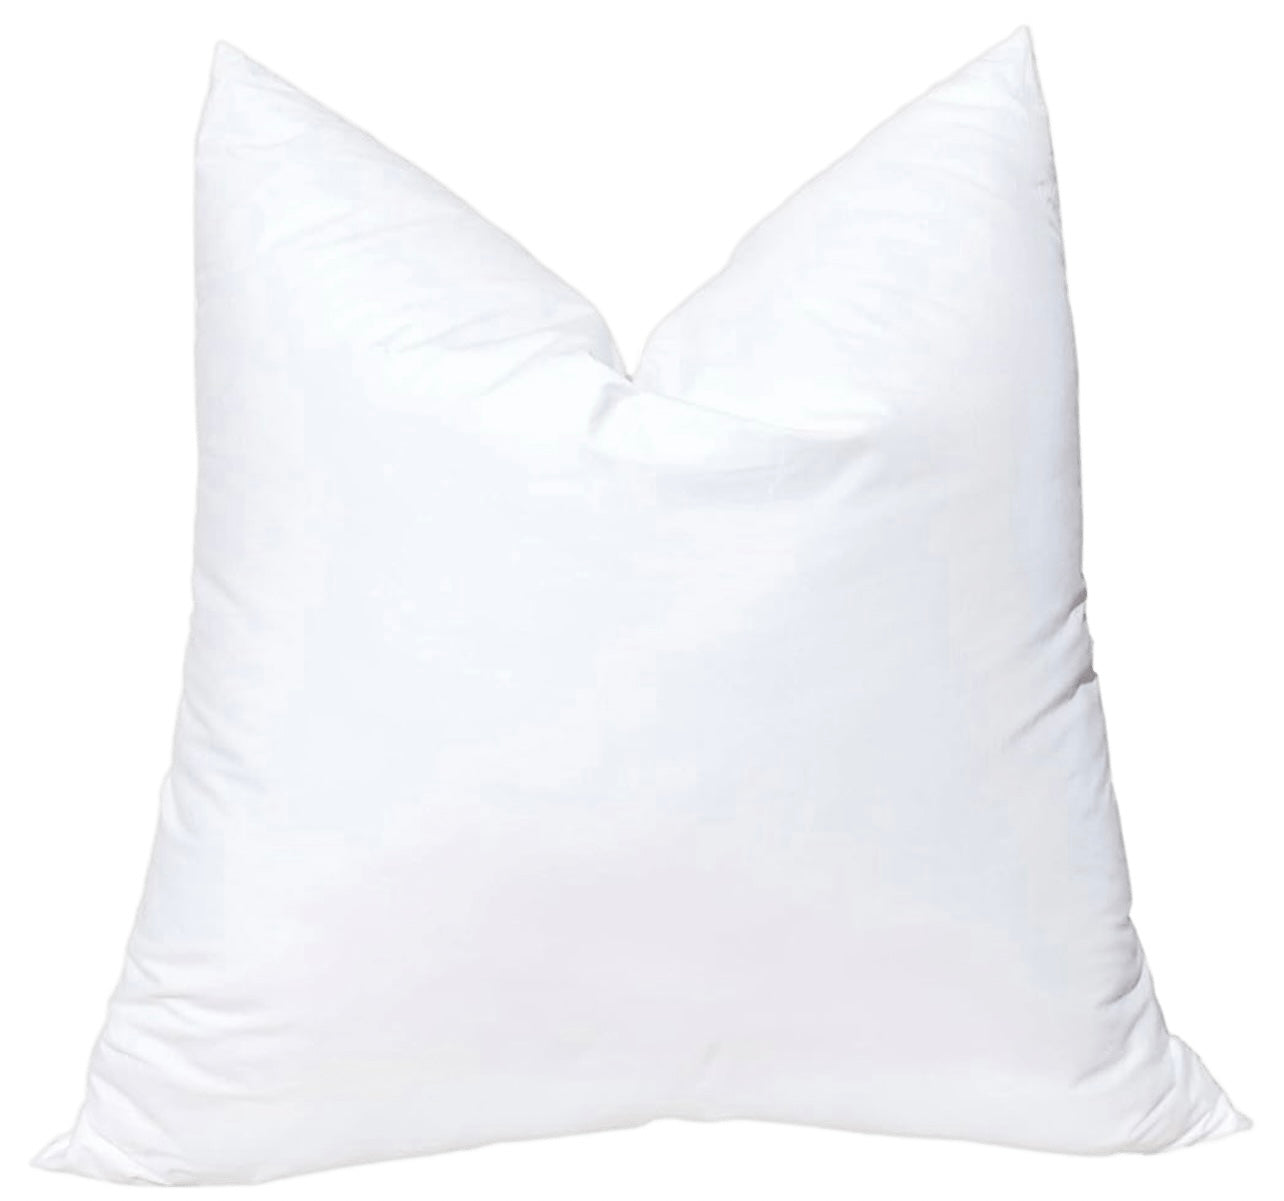 18x18 inch Luxury Goose Down Feather Pillow inserts – Cotton and Crate